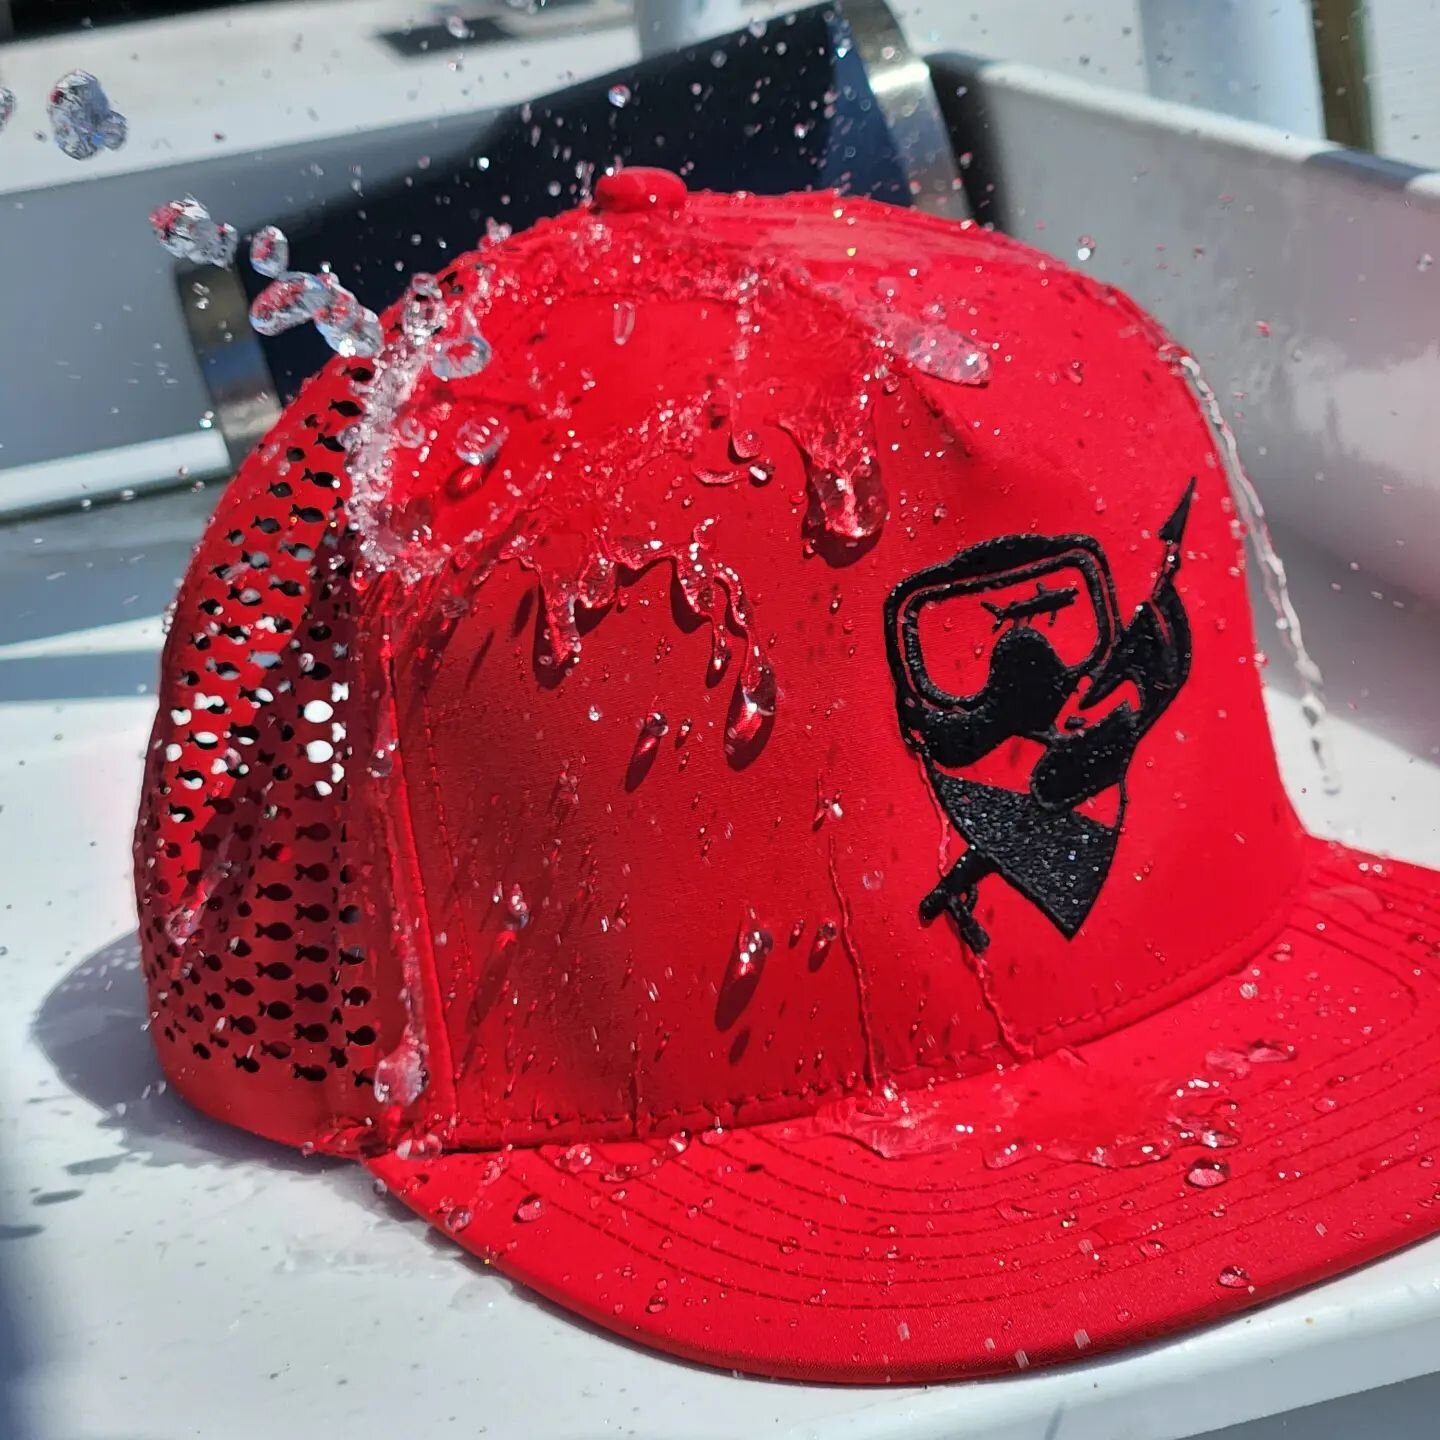 Happy Holidays! It's been a while, but the wait is over! New website experience and gear are now available! #waterproof #snapbacks #onboardbandit #fishymesh